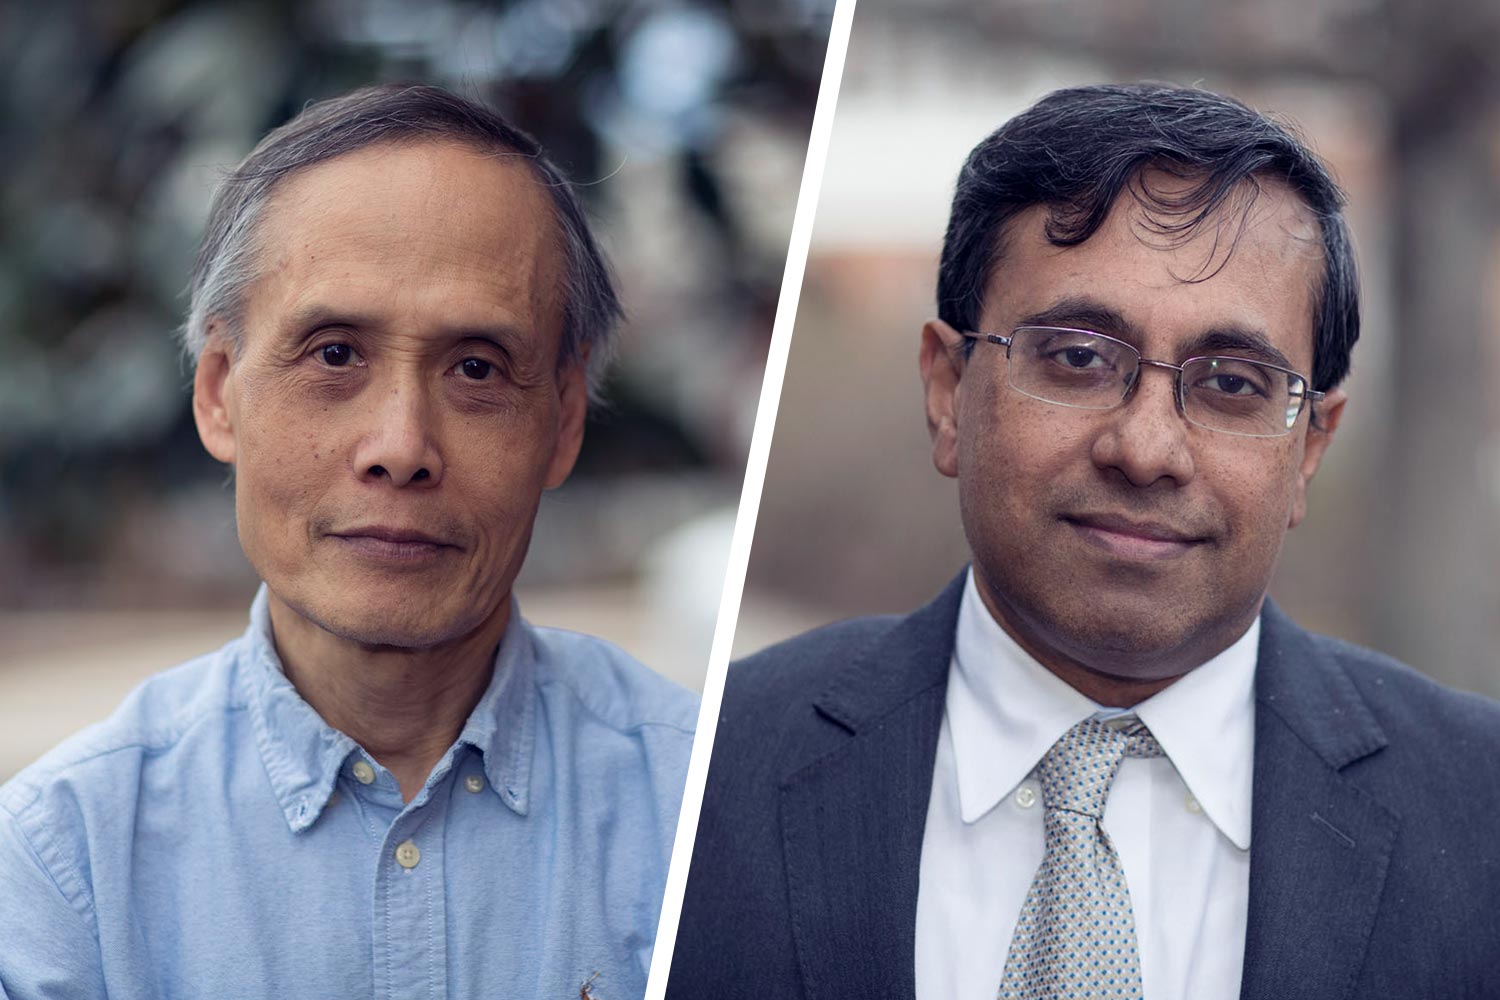 Headshots left to right: Joseph Poon and Avik Ghosh